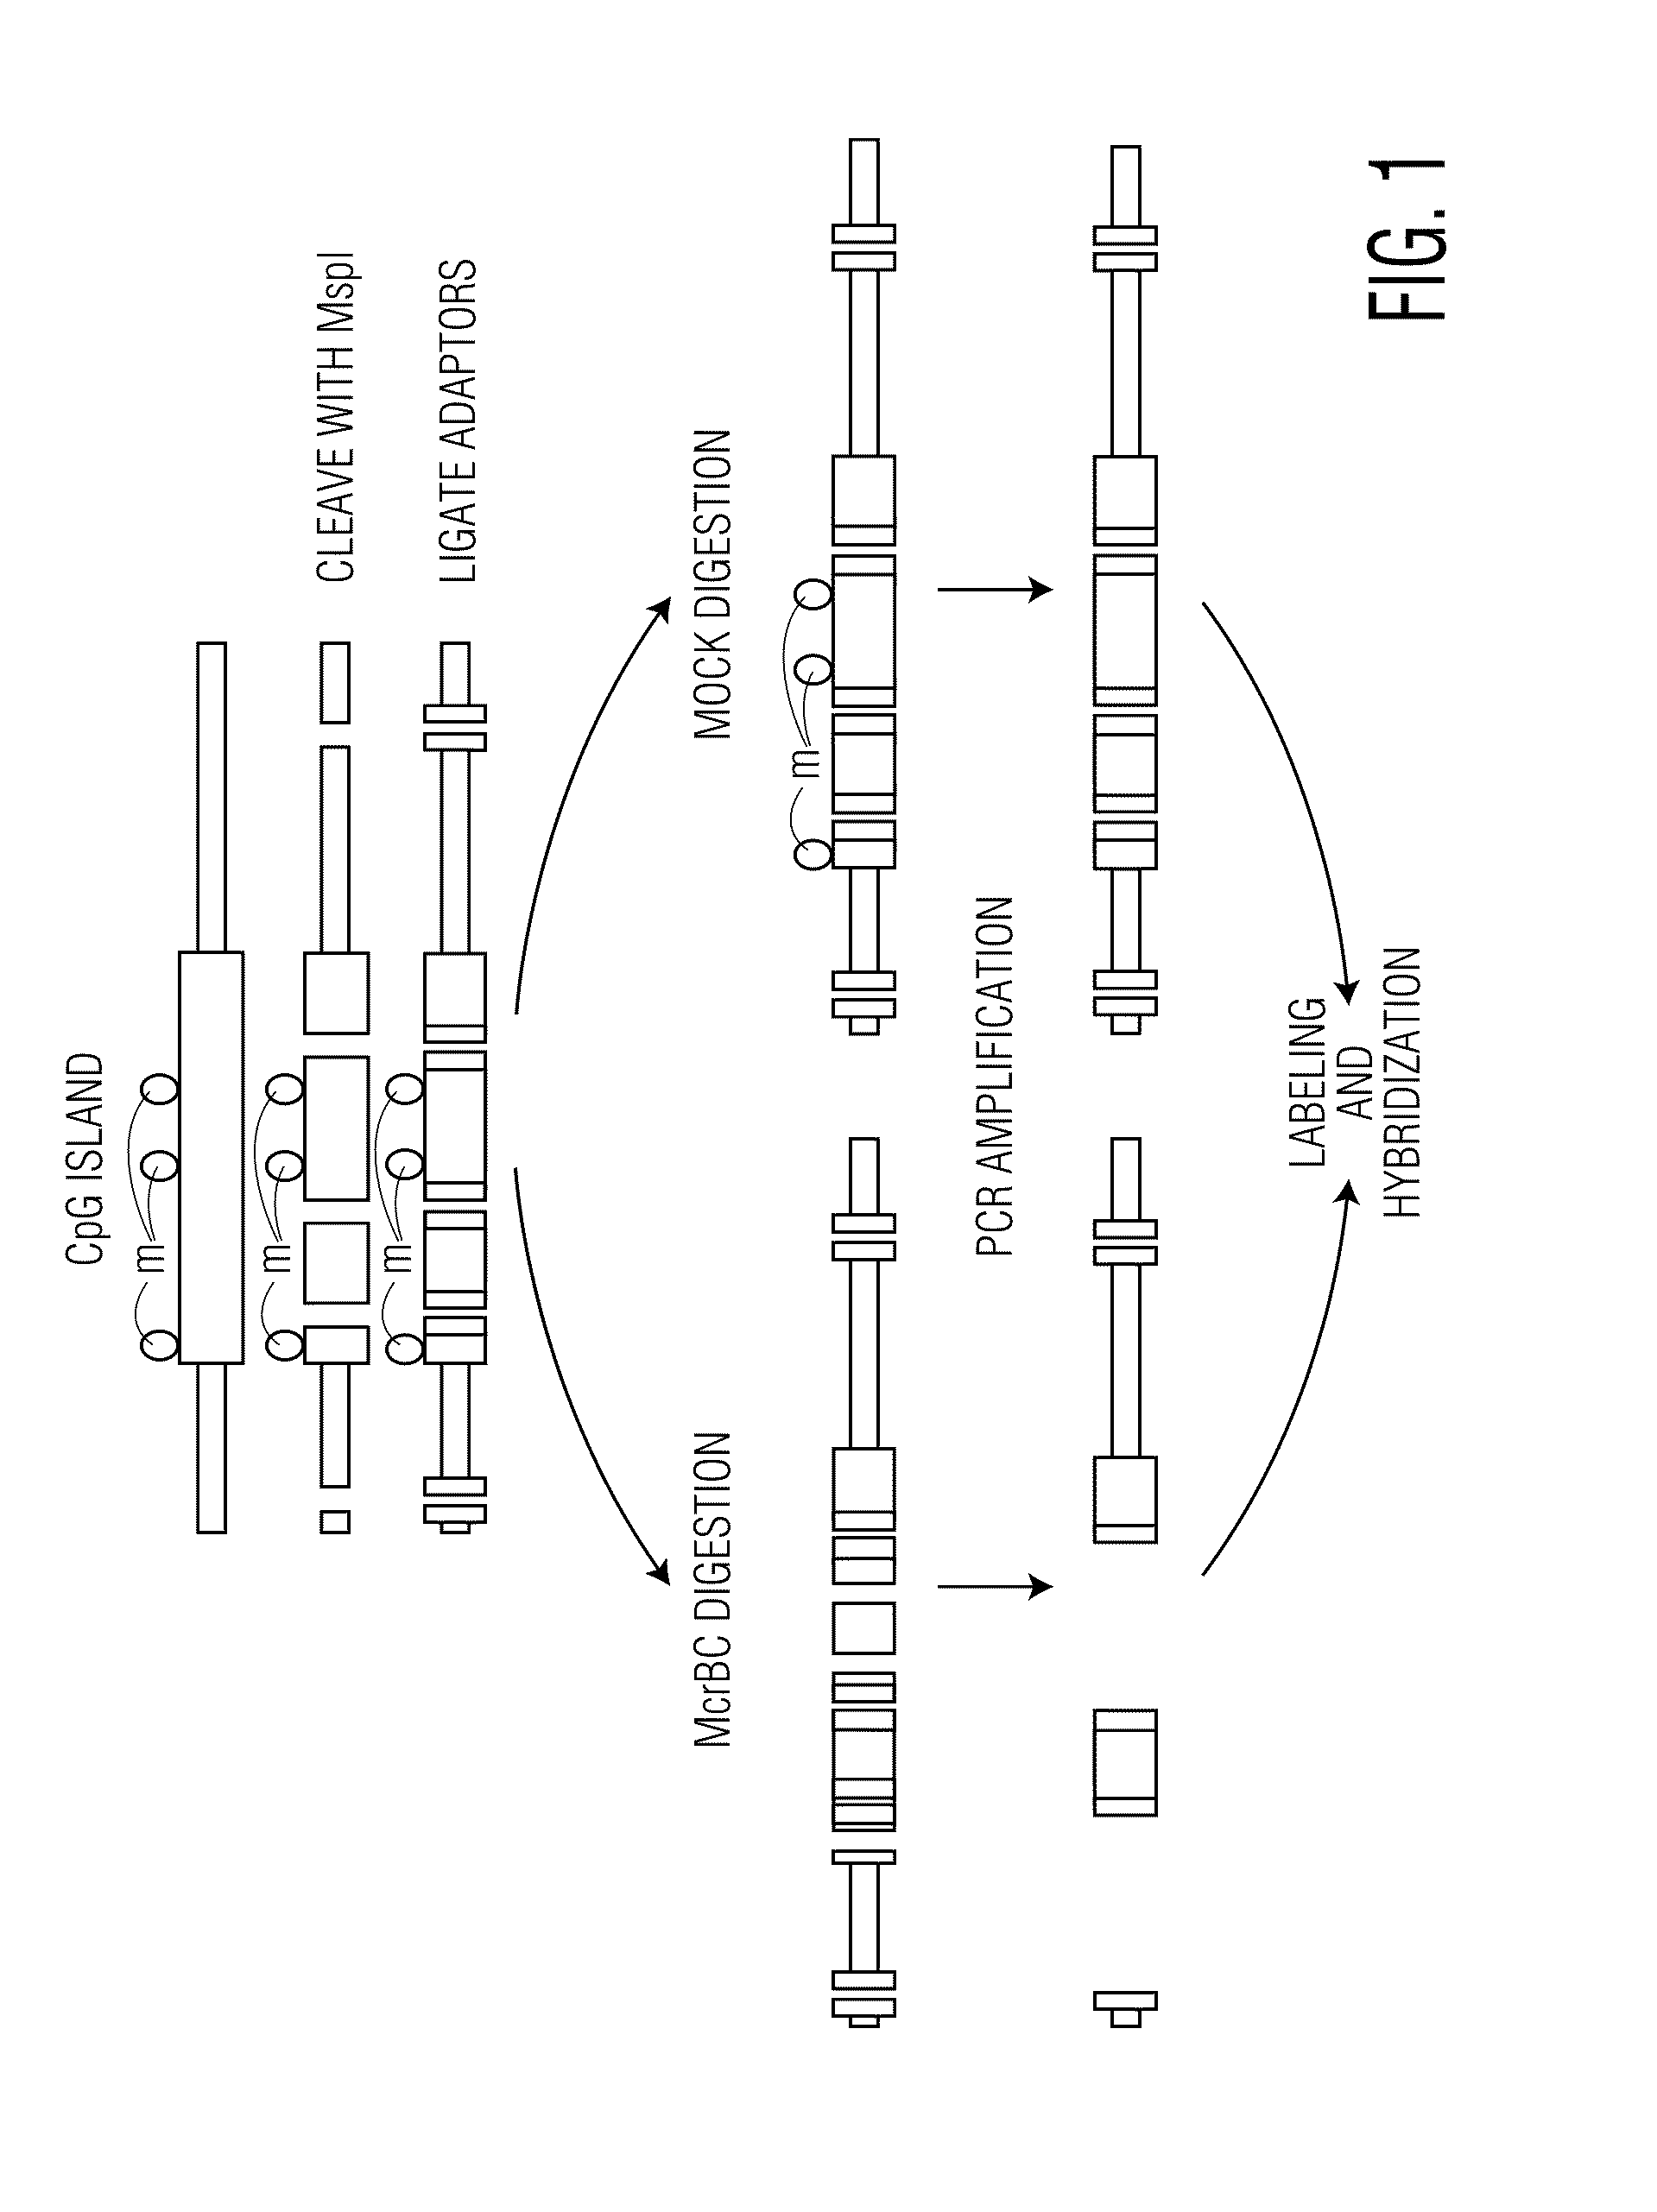 Method for the analysis of ovarian cancer disorders